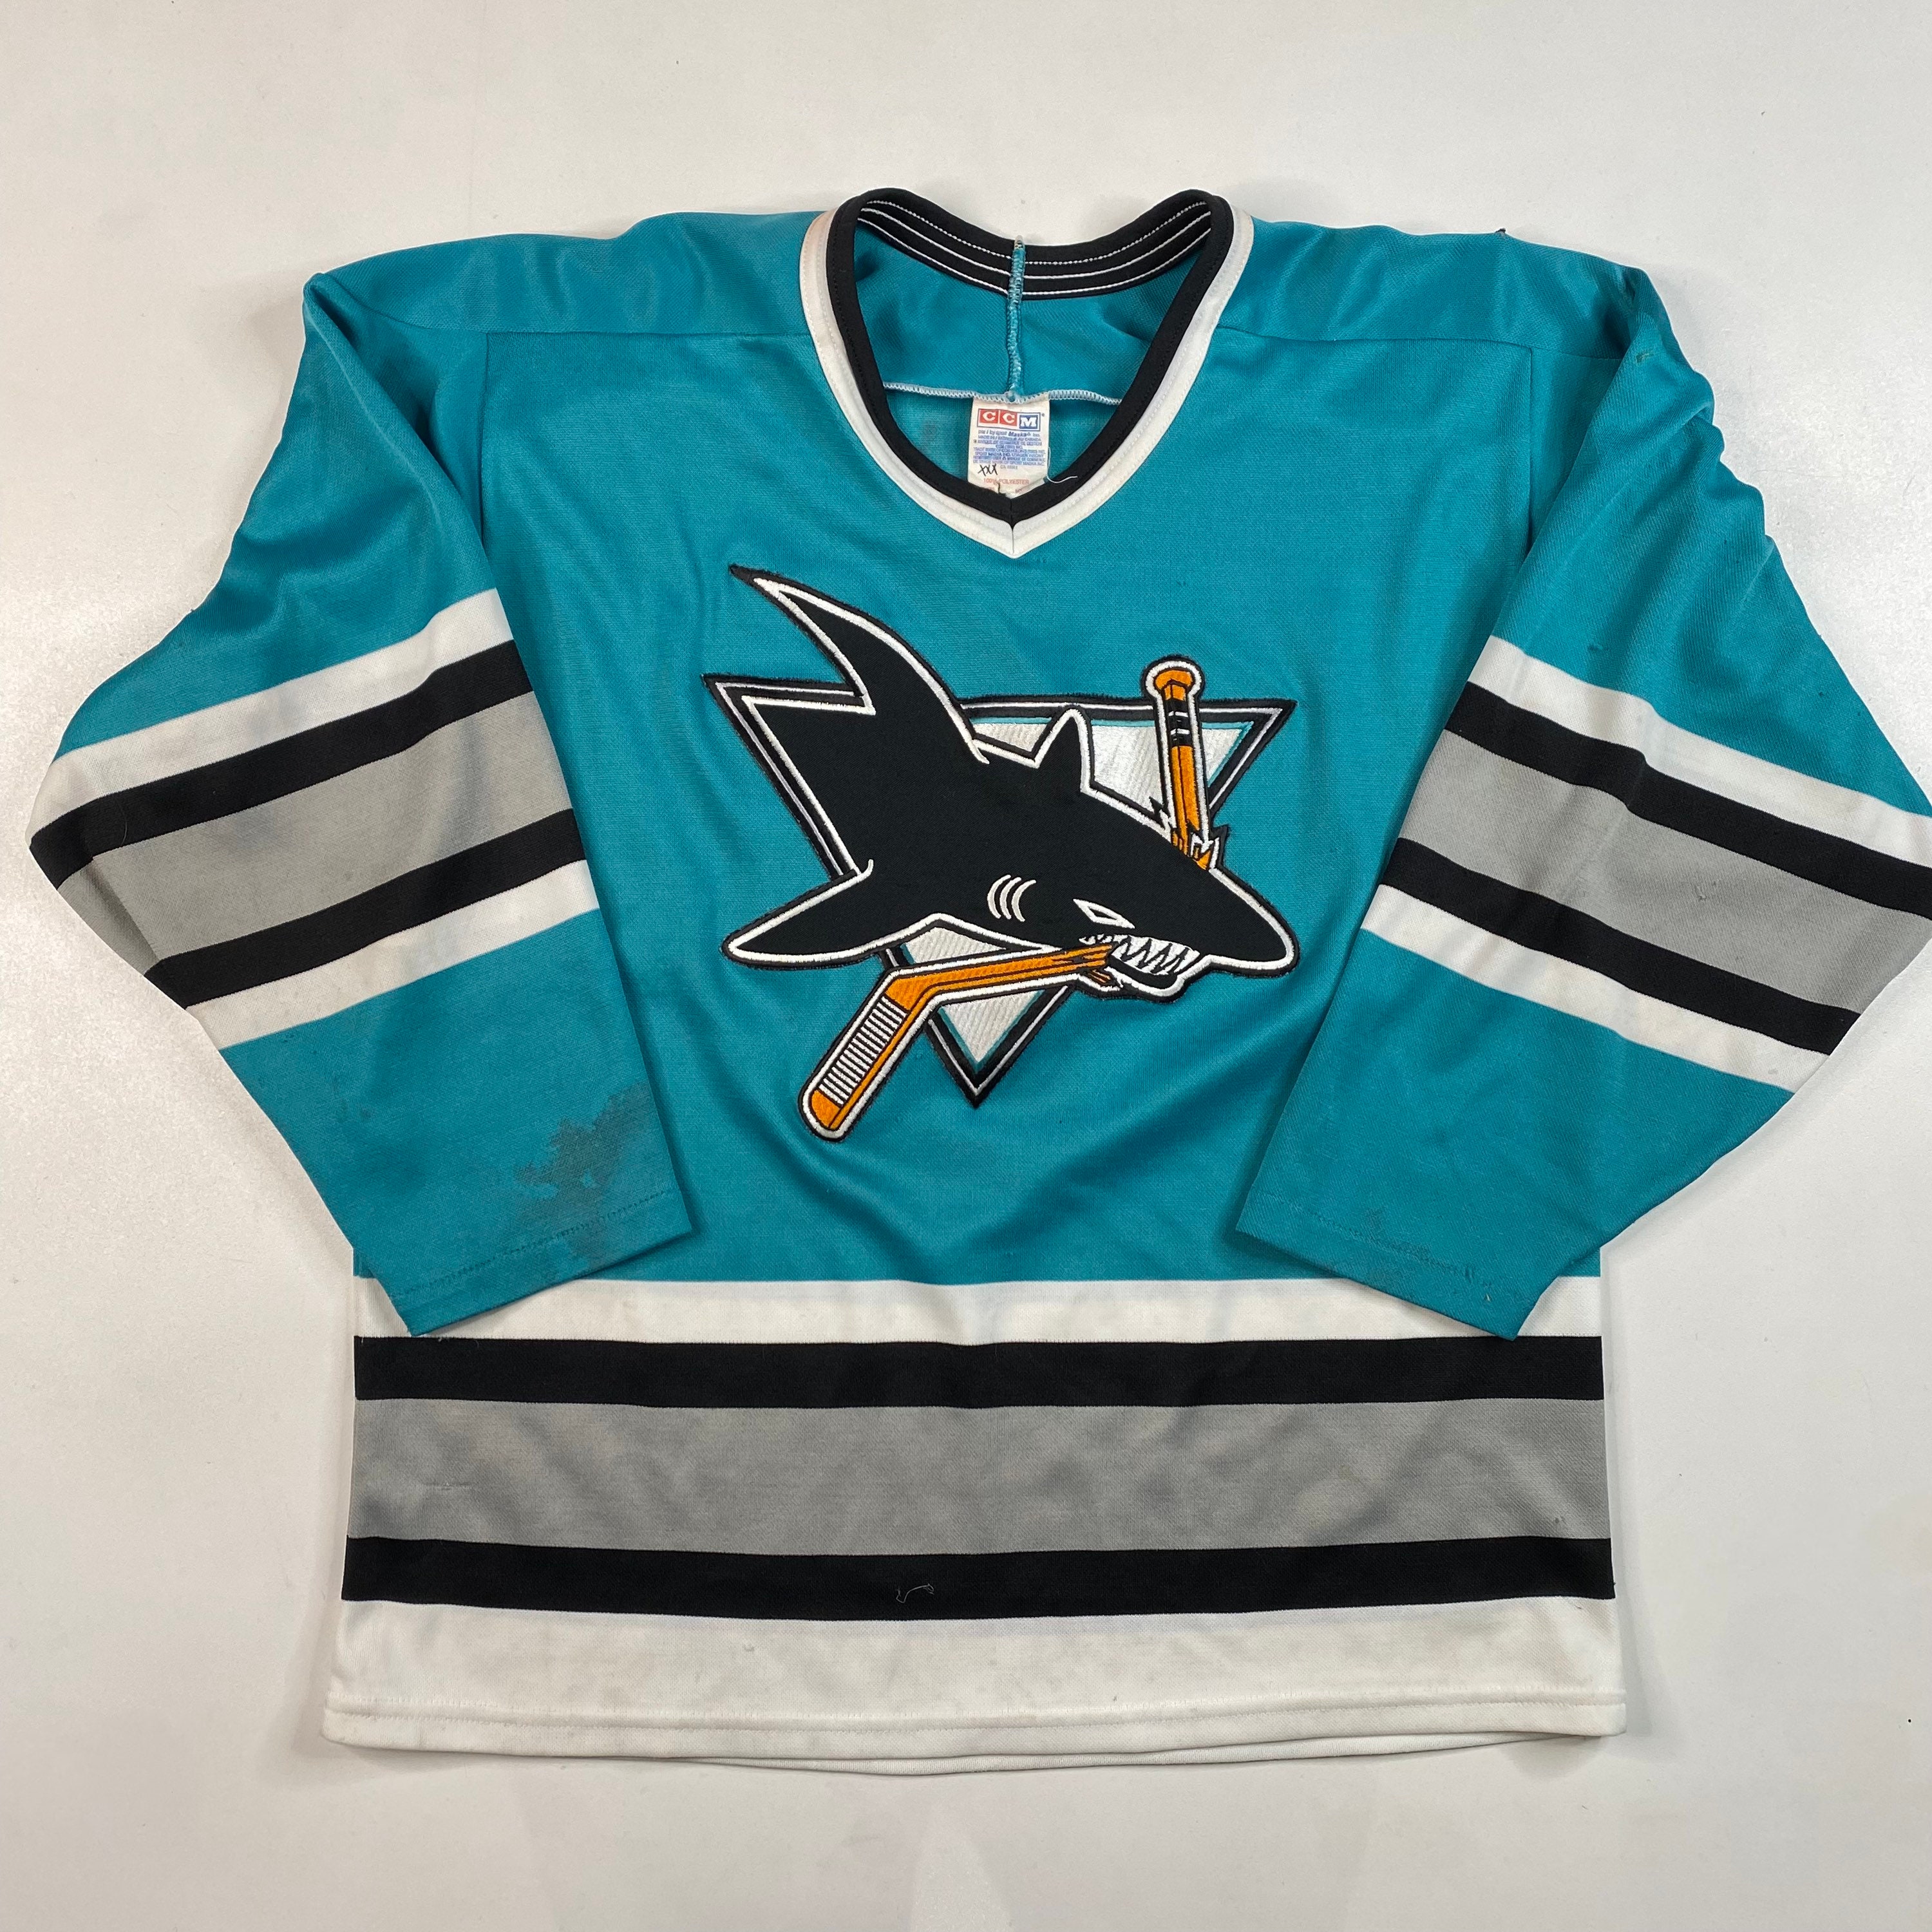 the sharks jersey